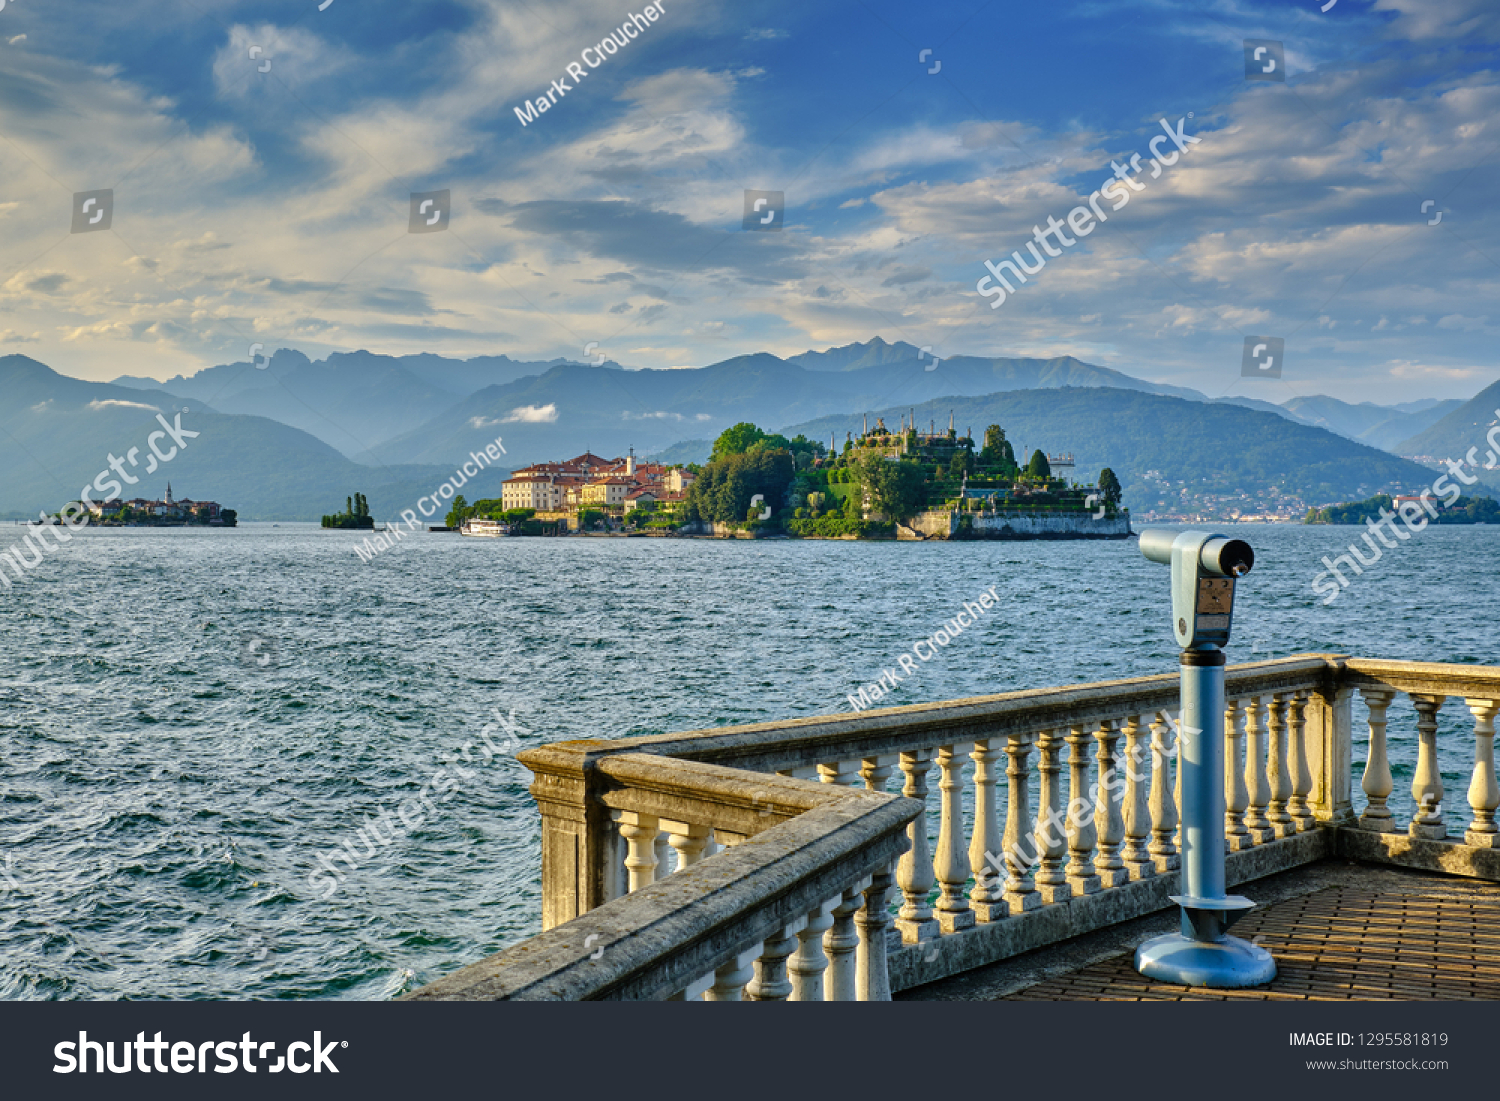 In Stresa Italy, on the shore of Lake Maggiore looking out over the Barromean islands in the evening light. #1295581819